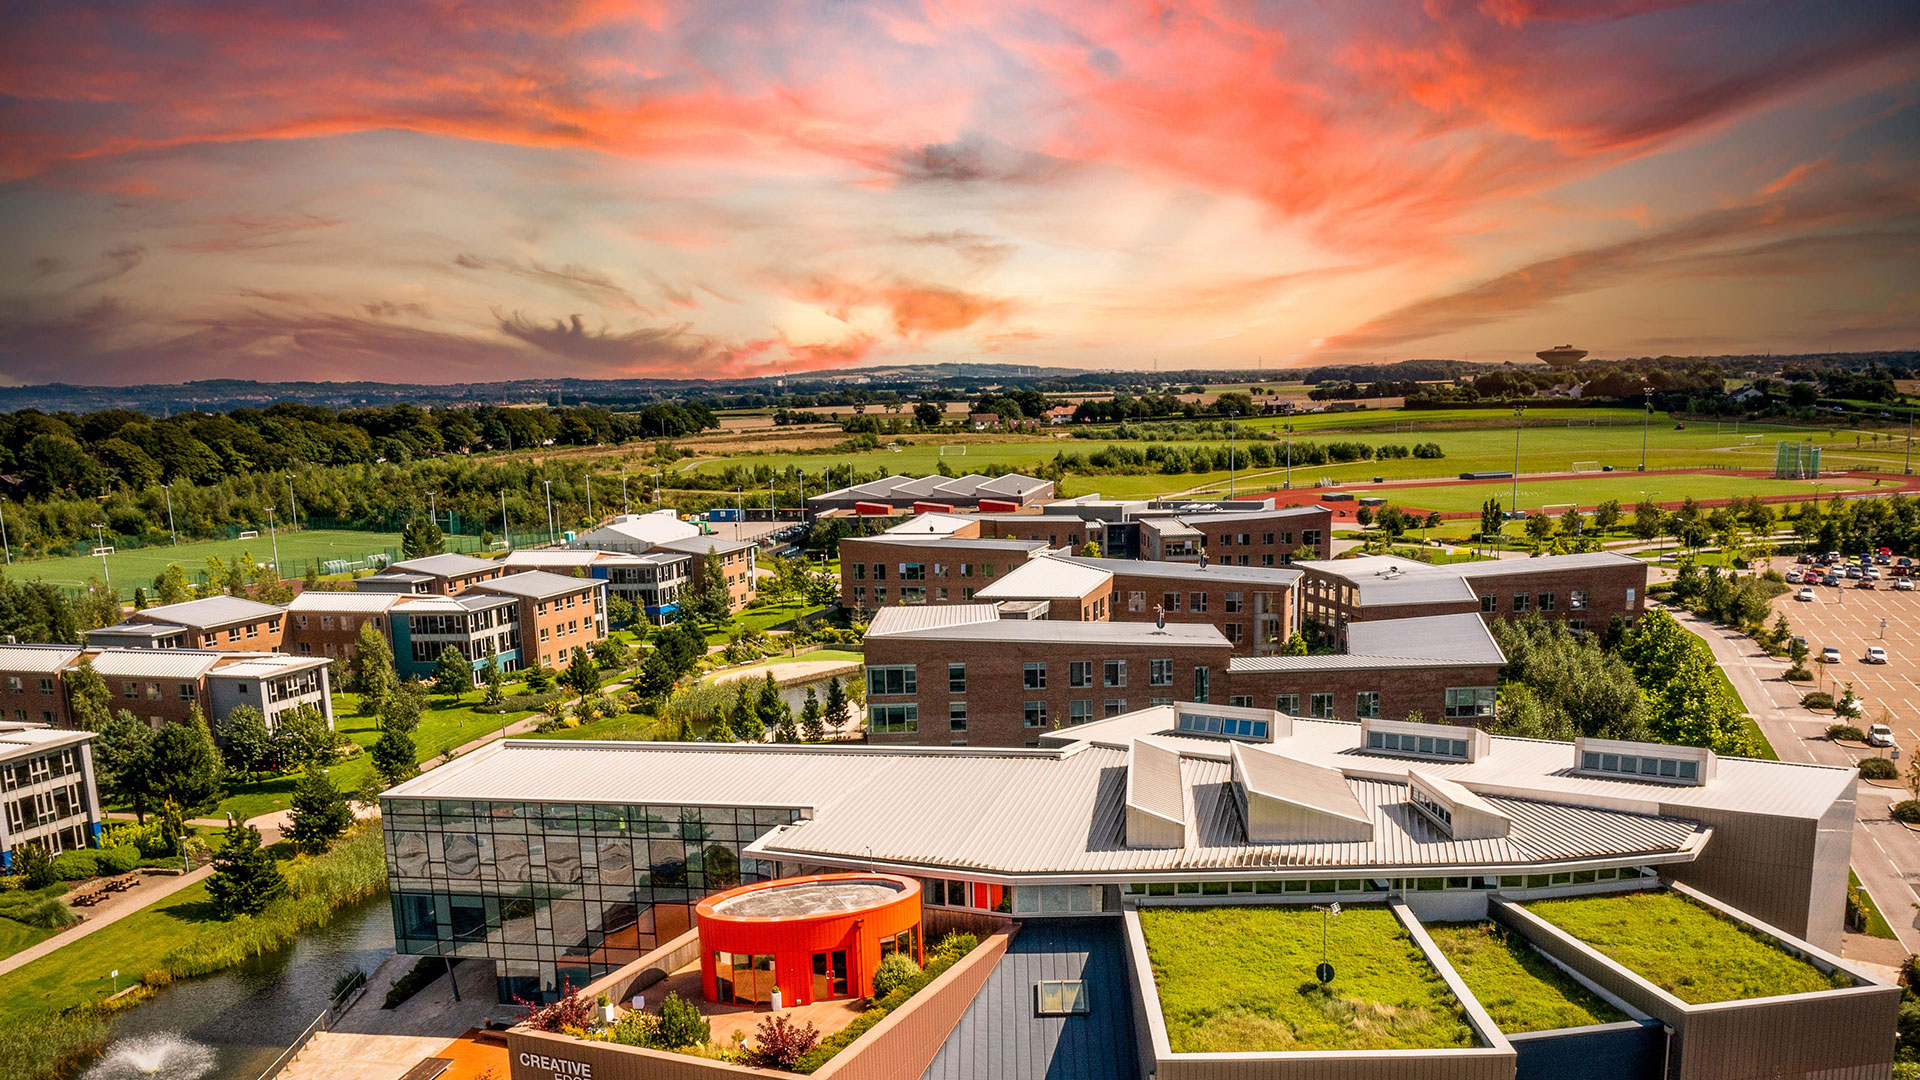 Taken up high by a drone showing Creative Edge with it's grassy roof and the Chancellors halls of residence. A beautiful sunset in the background.